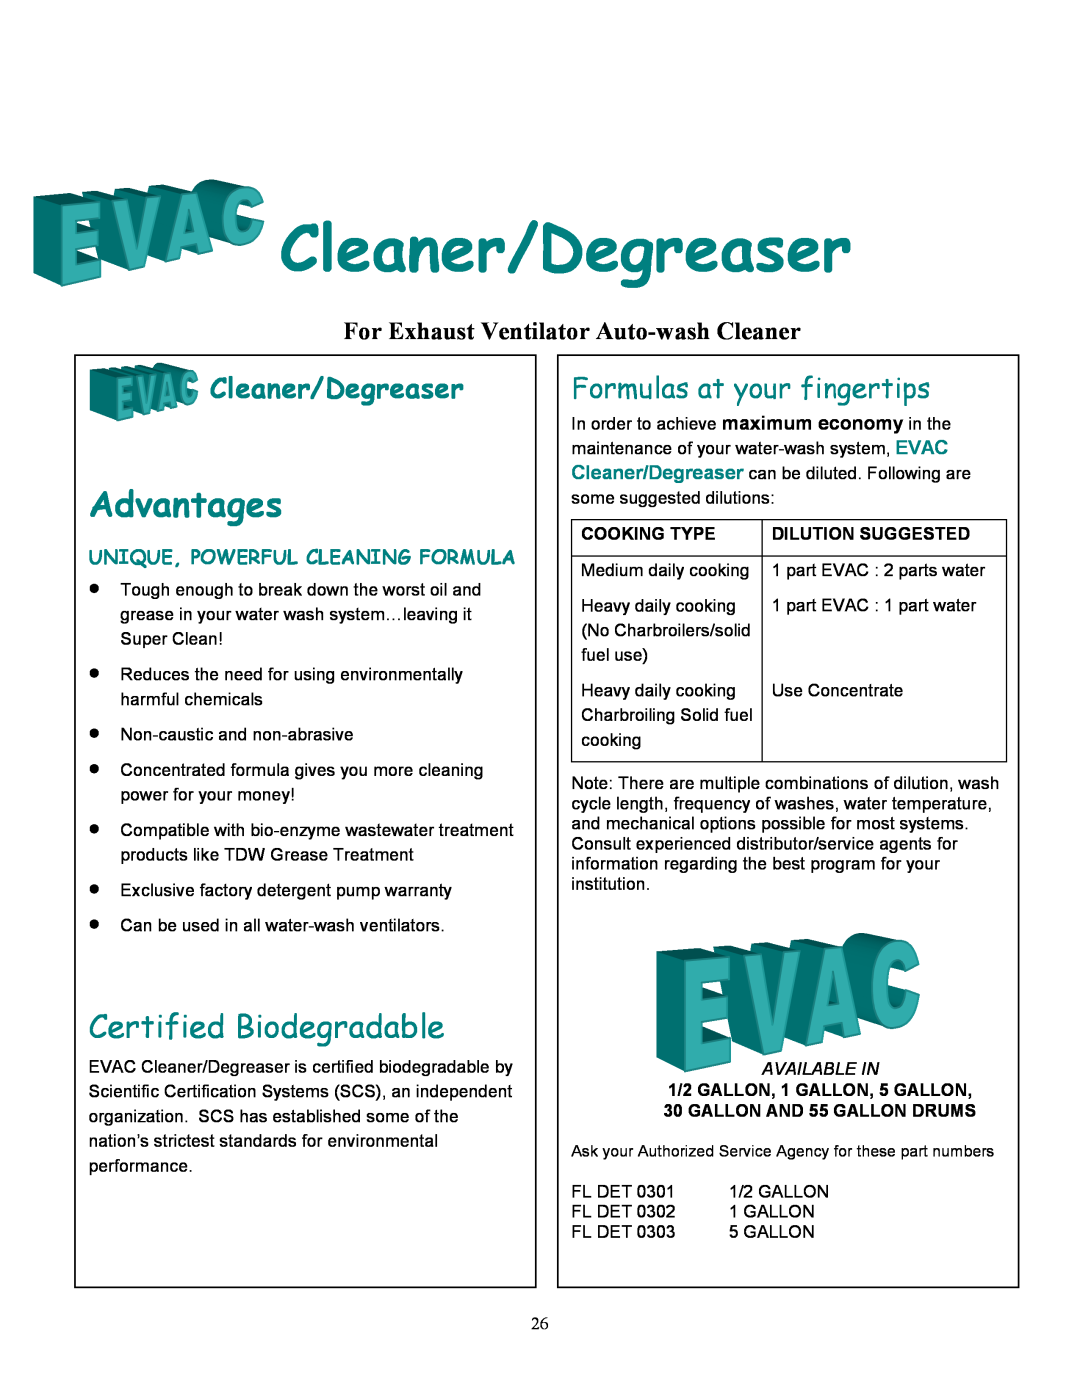 Unified Brands VENTILATION SYSTEMS Cleaner/Degreaser, Advantages, Certified Biodegradable, Formulas at your fingertips 